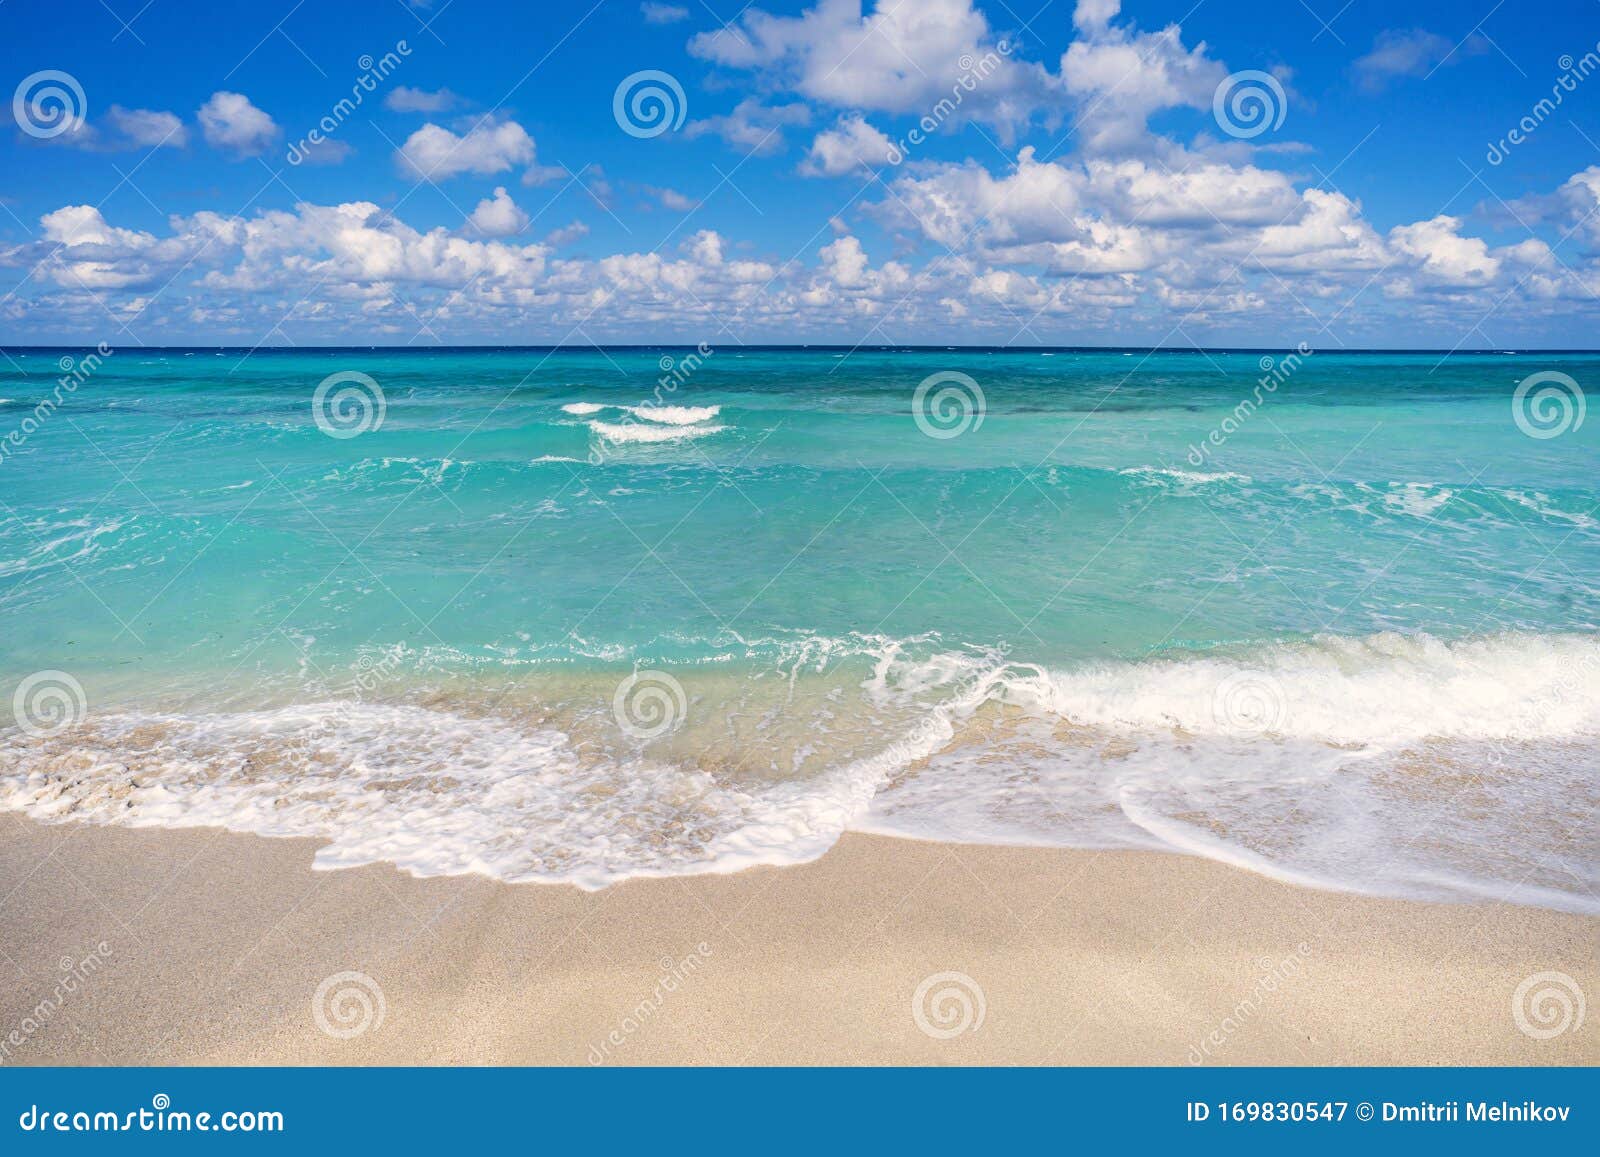 relaxing landscape view of beach, clear sea, blue sky. beautiful tropical landscape with turquoise ocean. horizon line on the